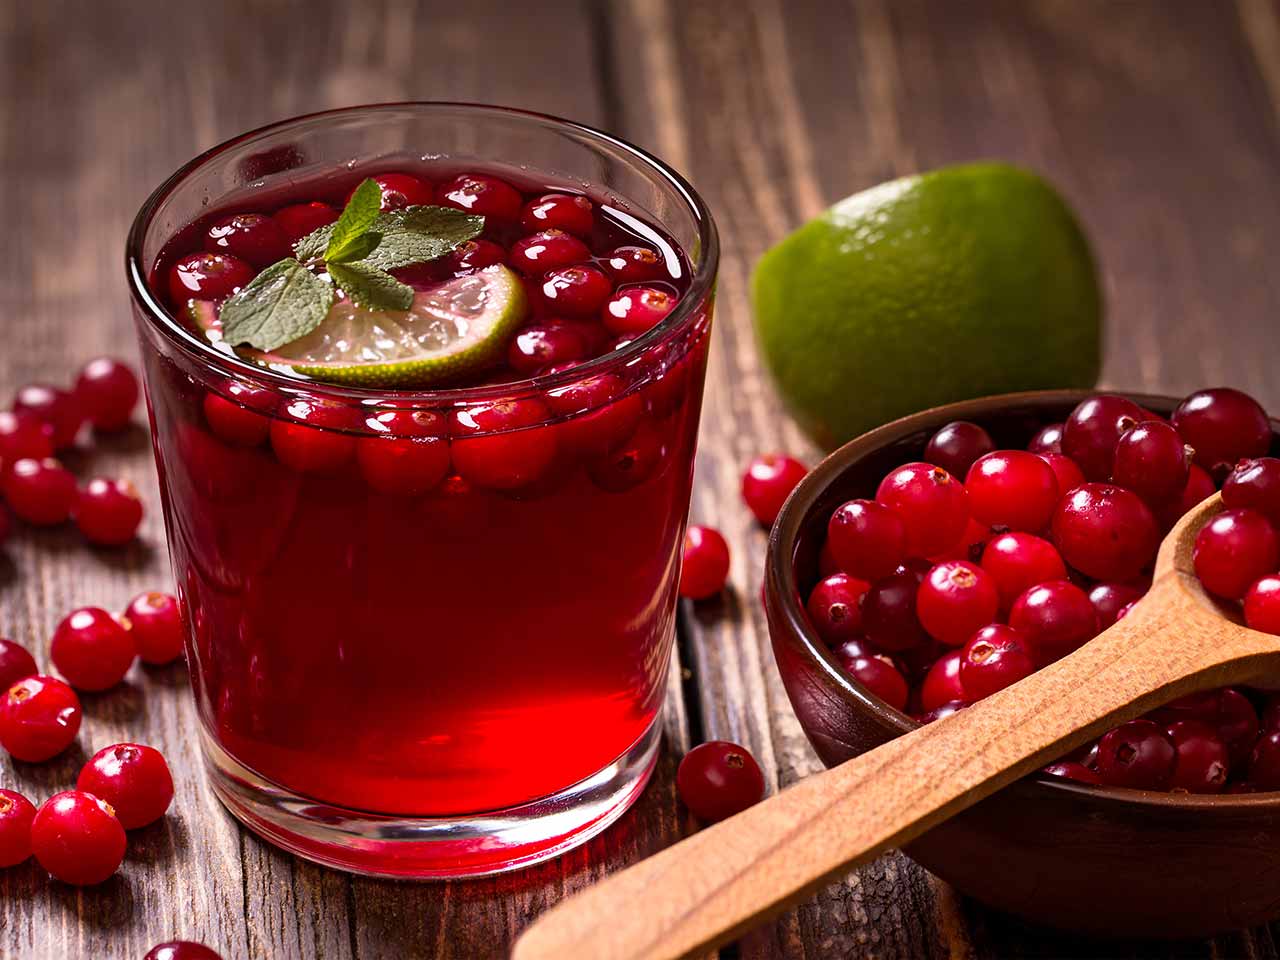 Fascinating study reveals cranberries can help with urinary tract infections, but only if you take capsules, not juice